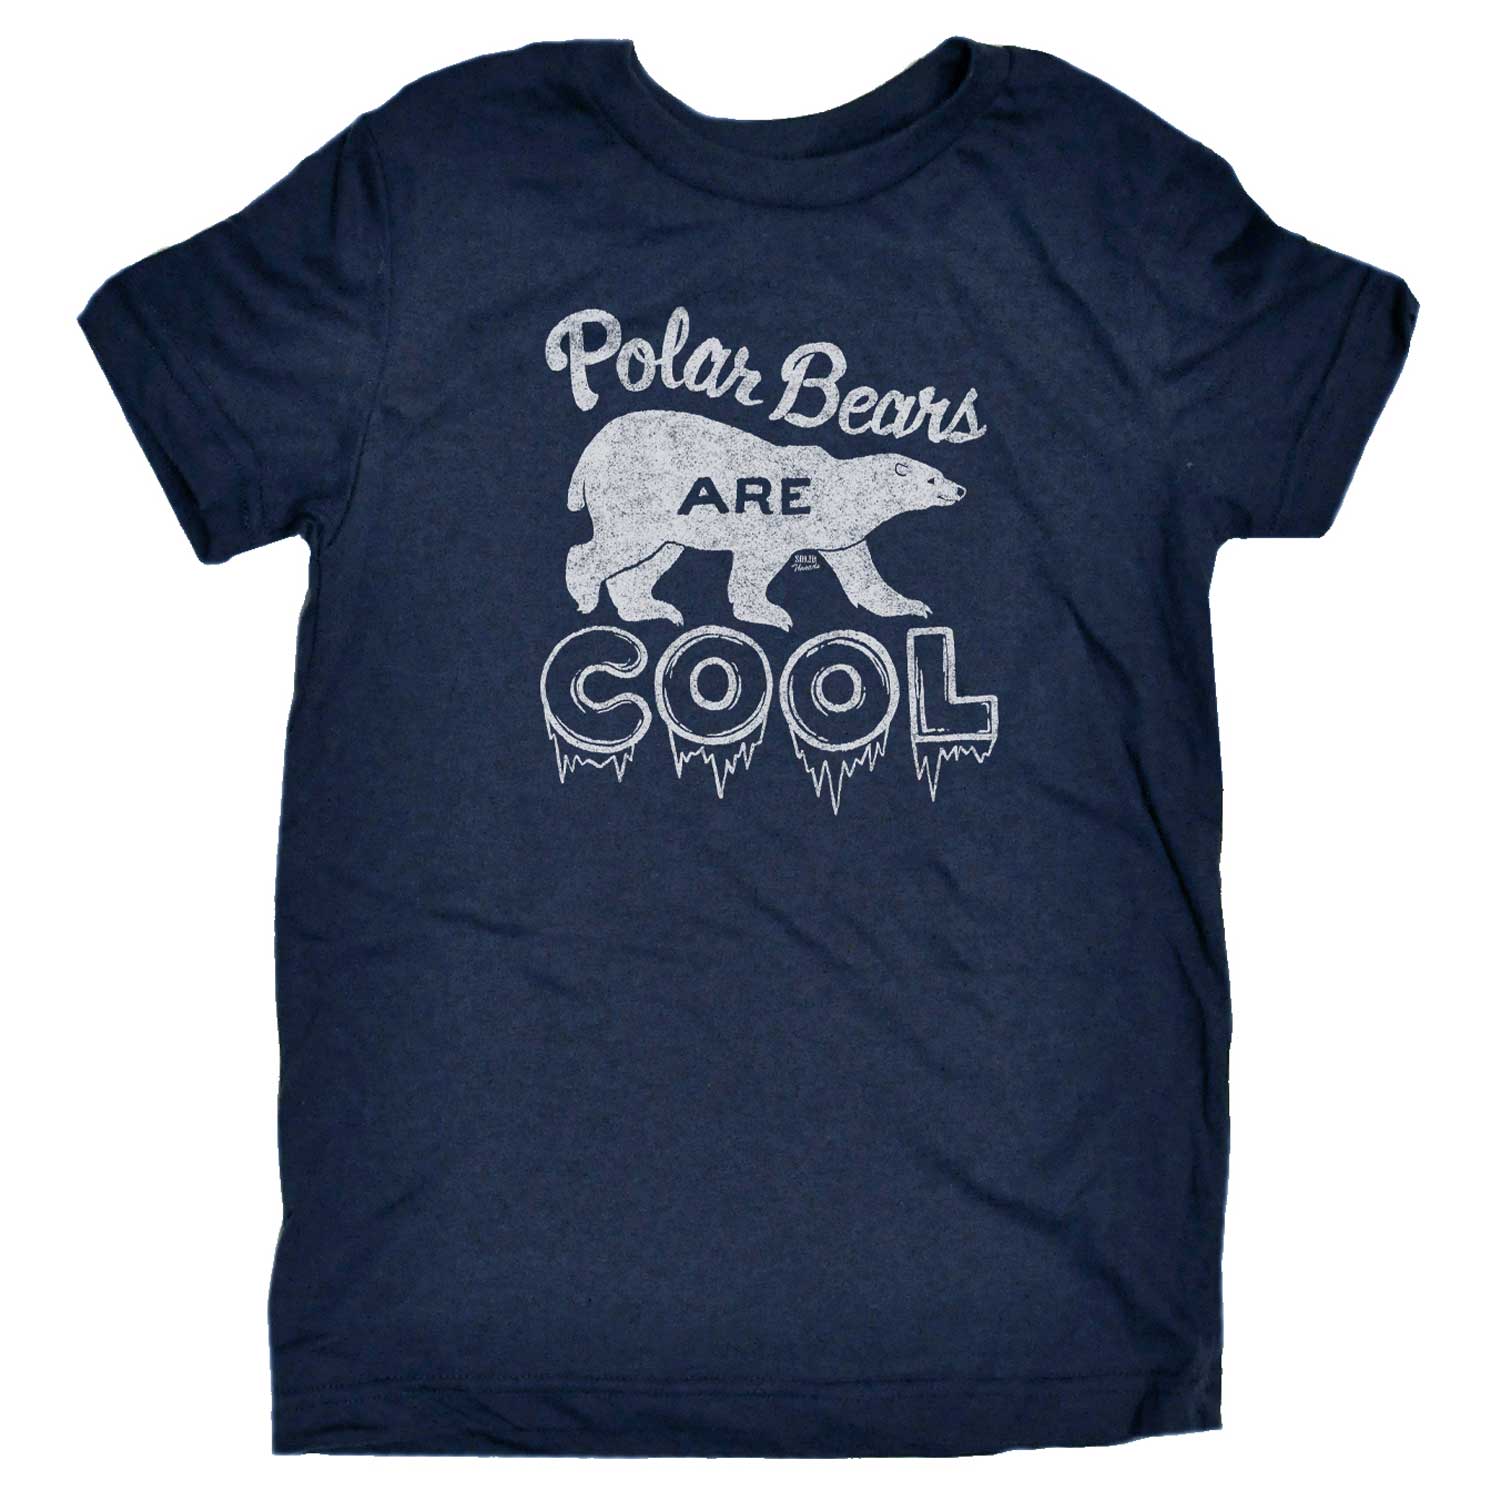 Kids Polar Bears Are Cool Retro Winter Graphic T-Shirt | Cute Funny Animal Tee | Solid Threads